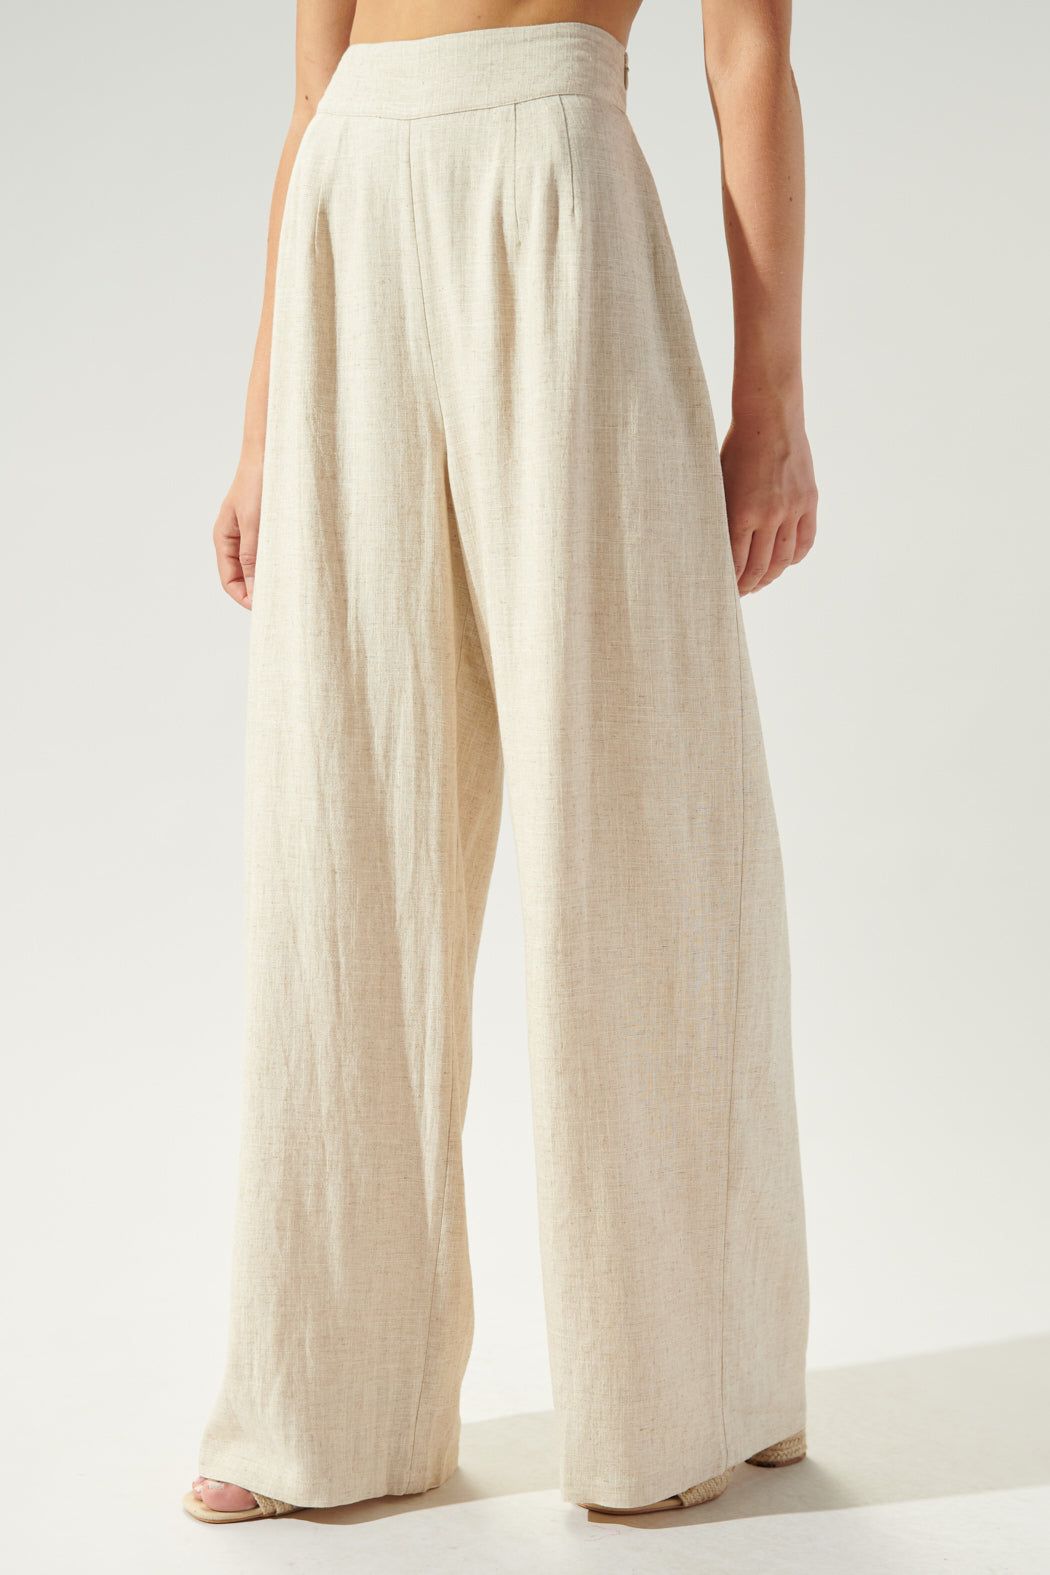 Effortless Chic: Linen Trousers for Every Season